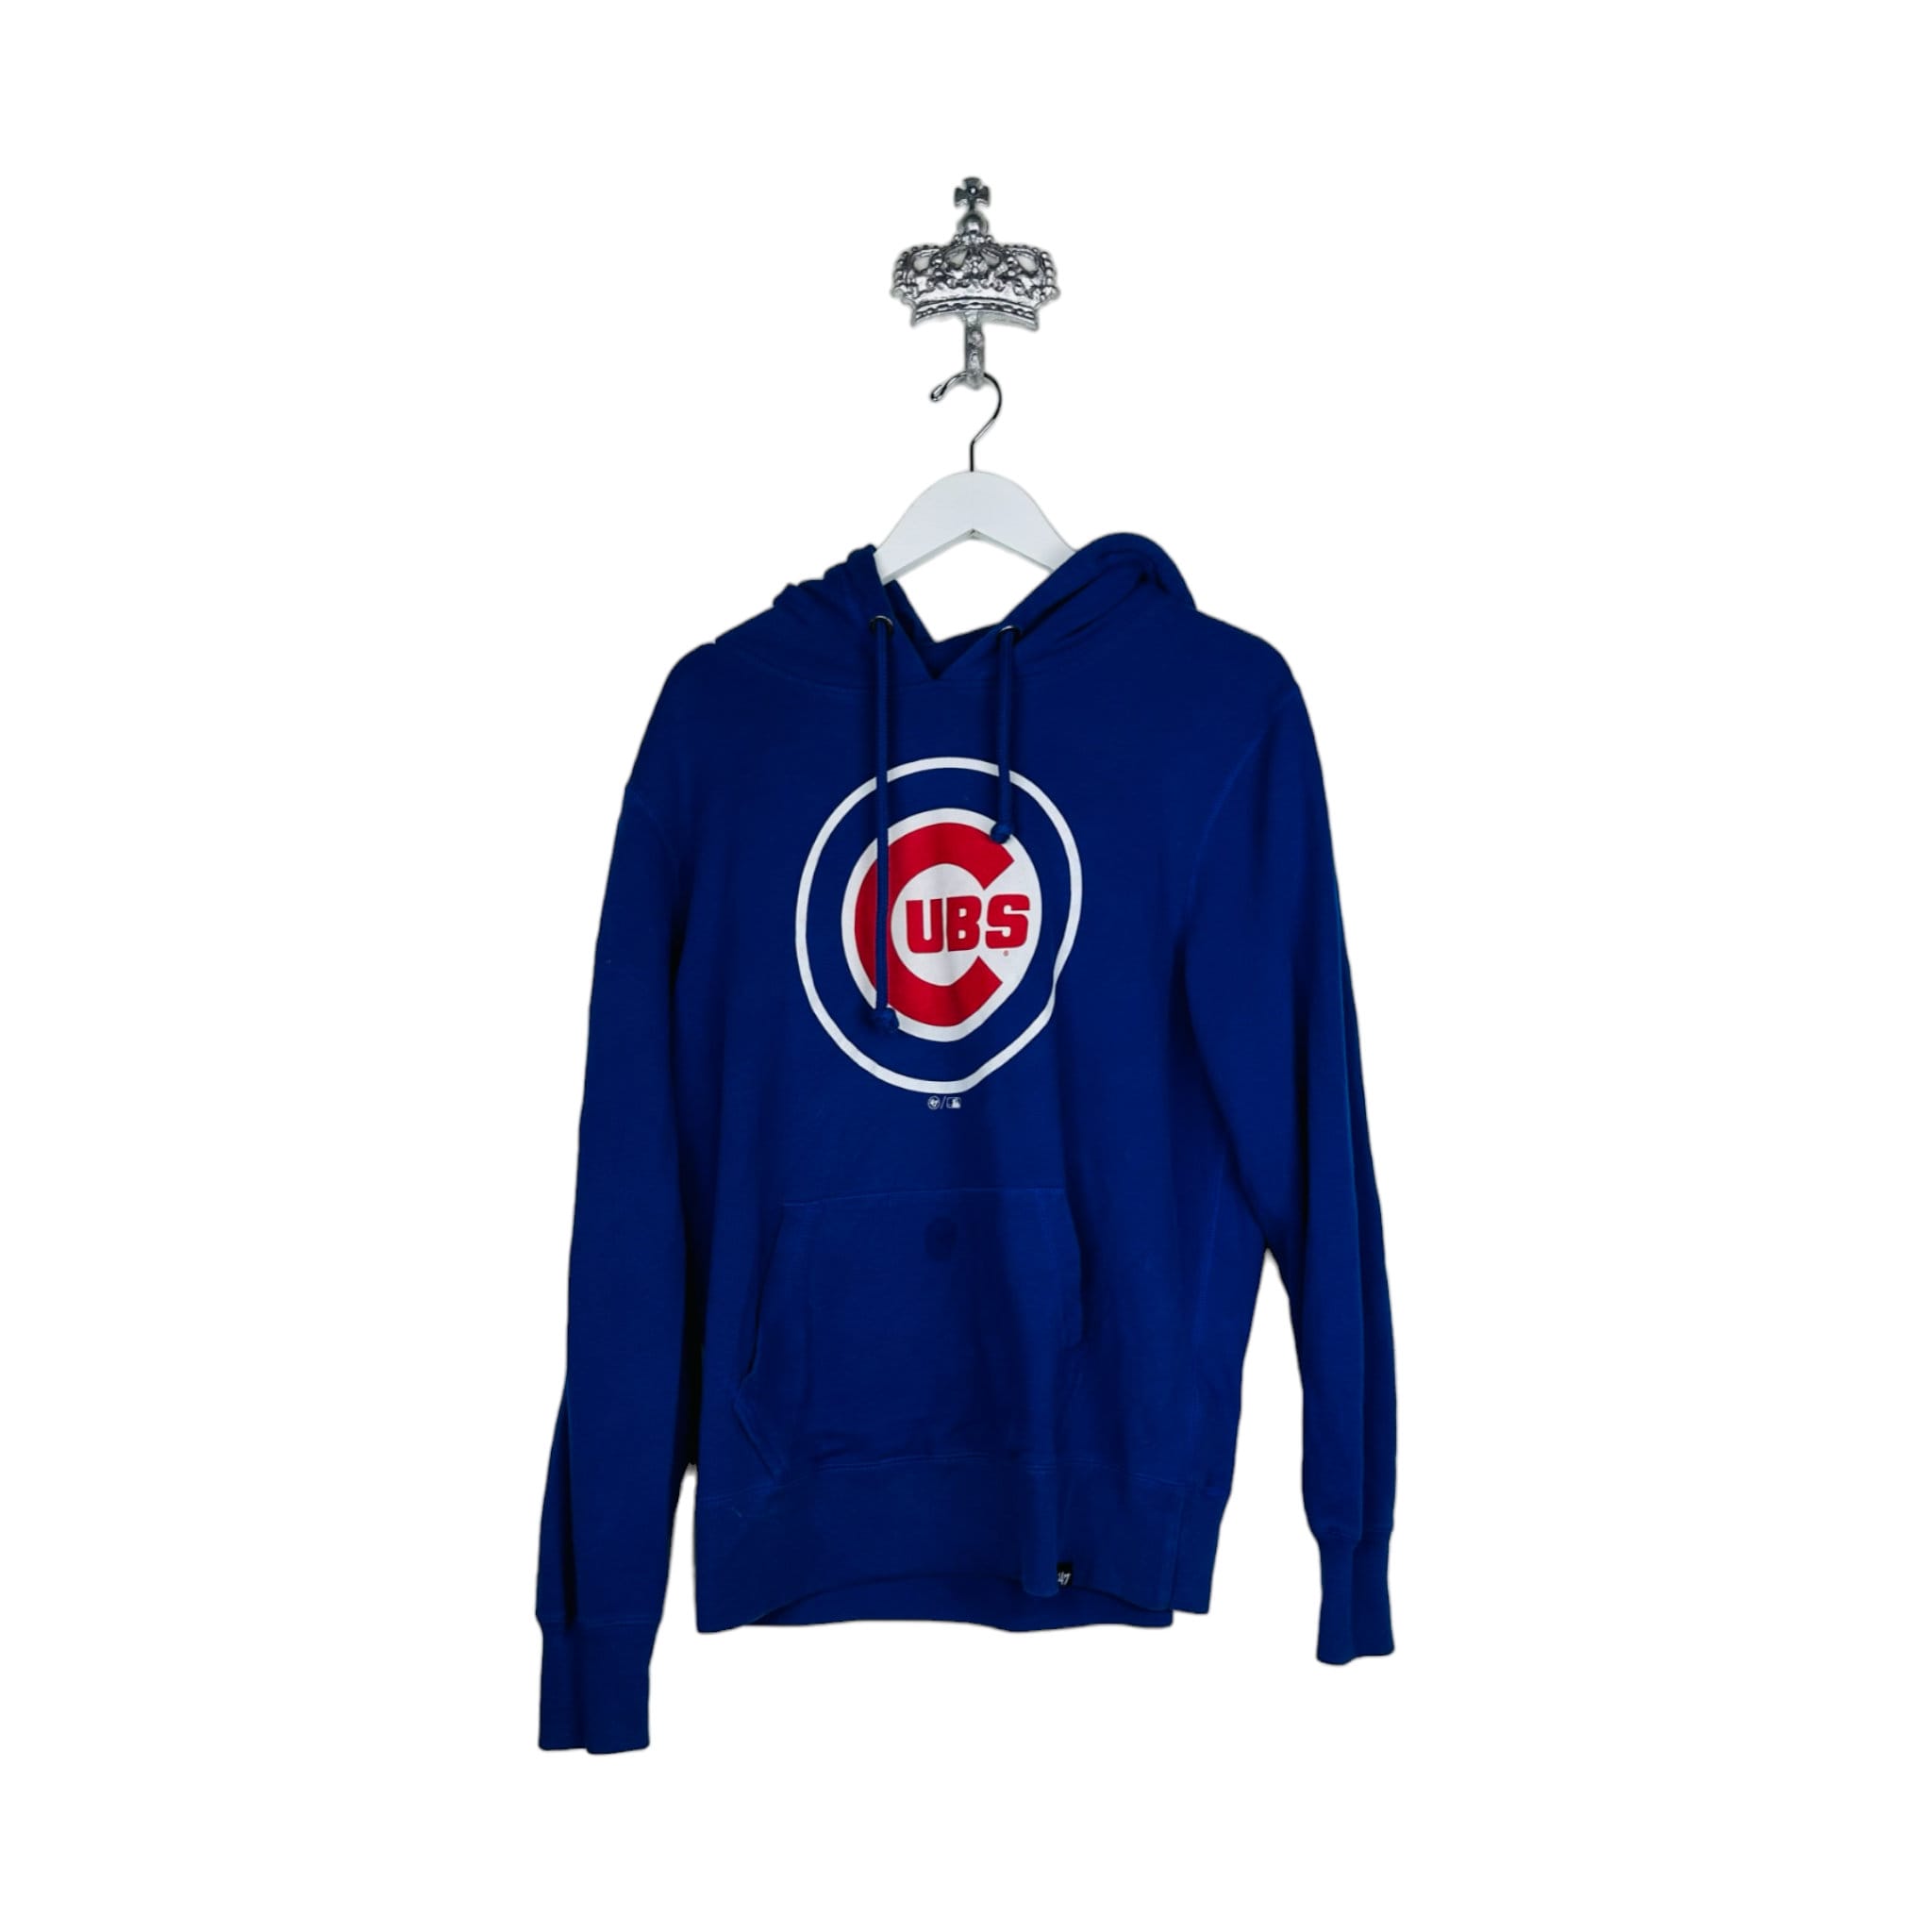 Chicago Cubs Youth Head Coach Hooded Sweatshirt – Wrigleyville Sports